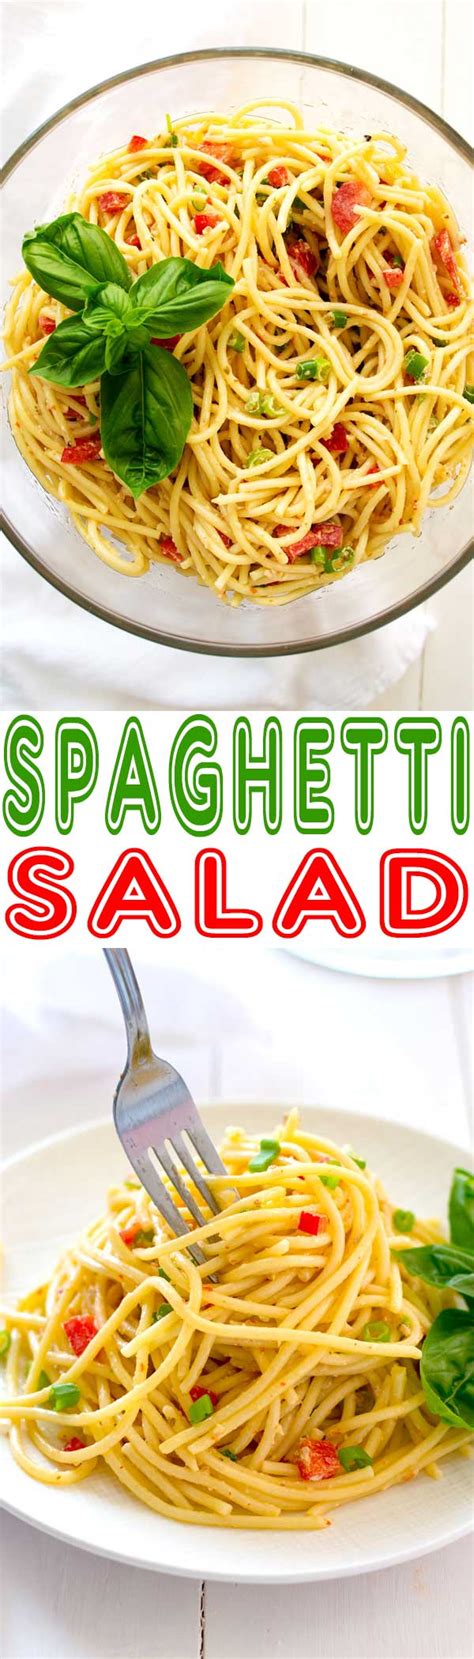 Then, sprinkle the salad supreme spice over. Spaghetti Salad with Italian Dressing - Kitchen Gidget